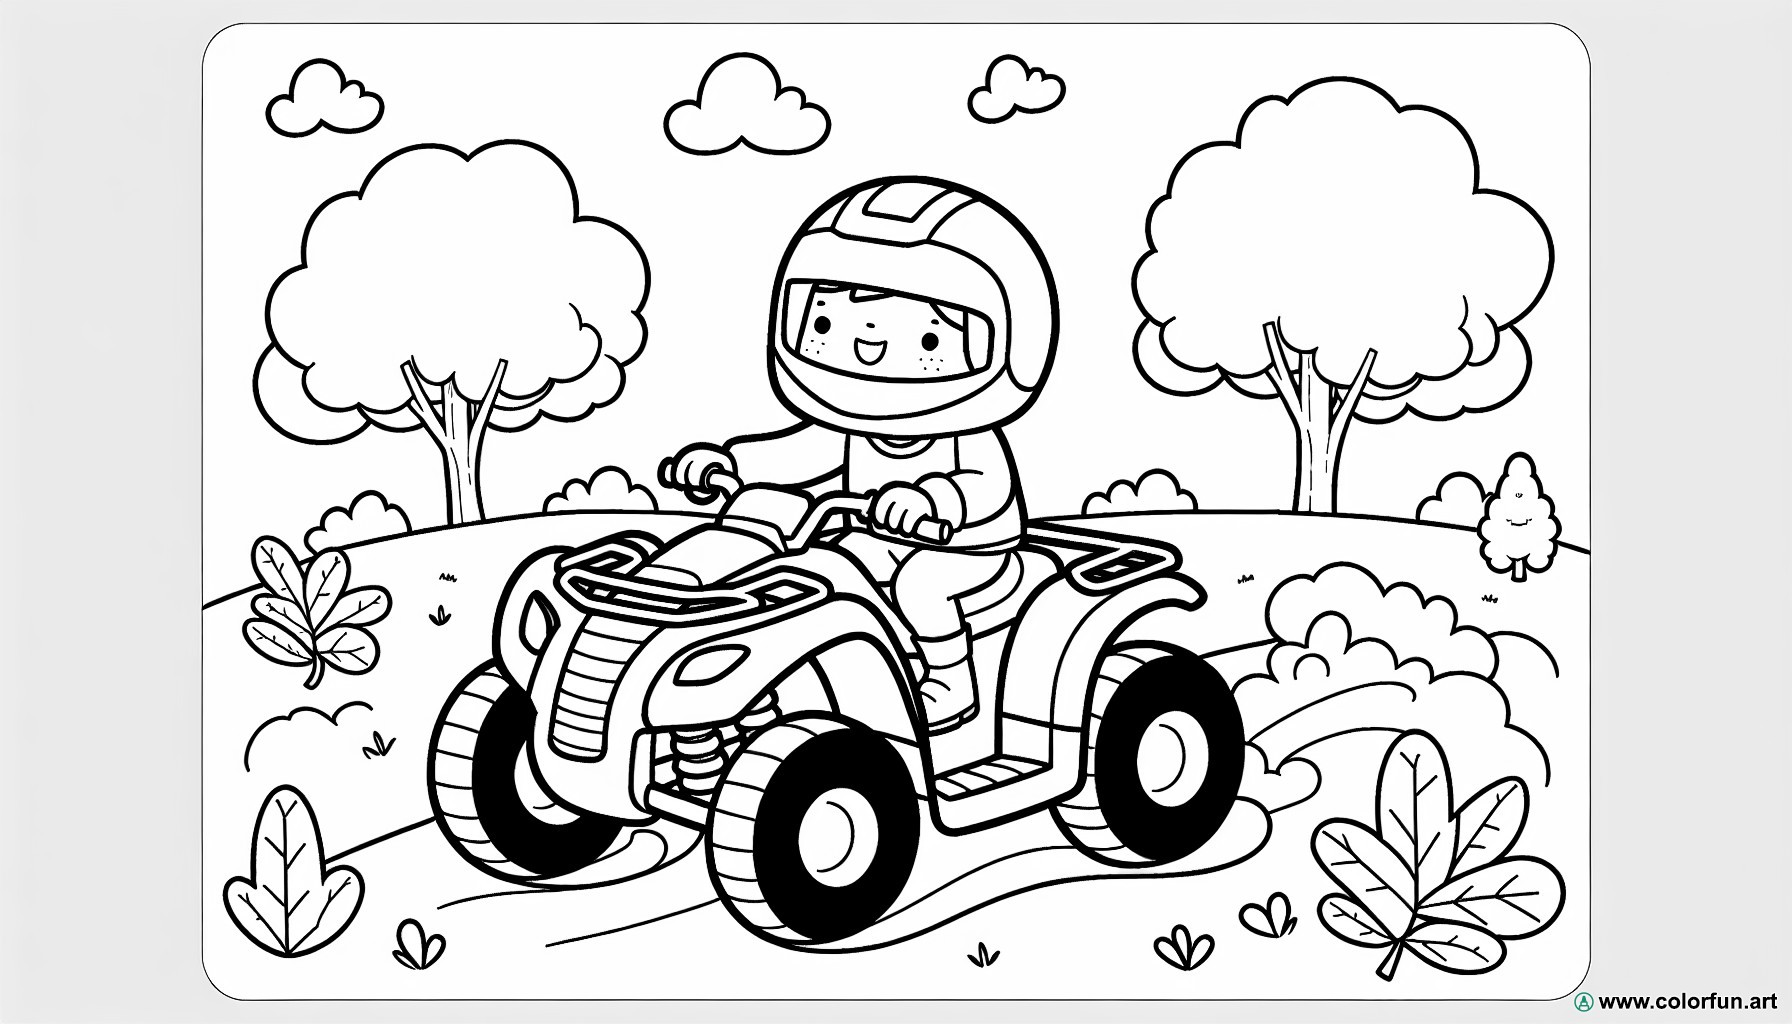 Easy quad coloring page